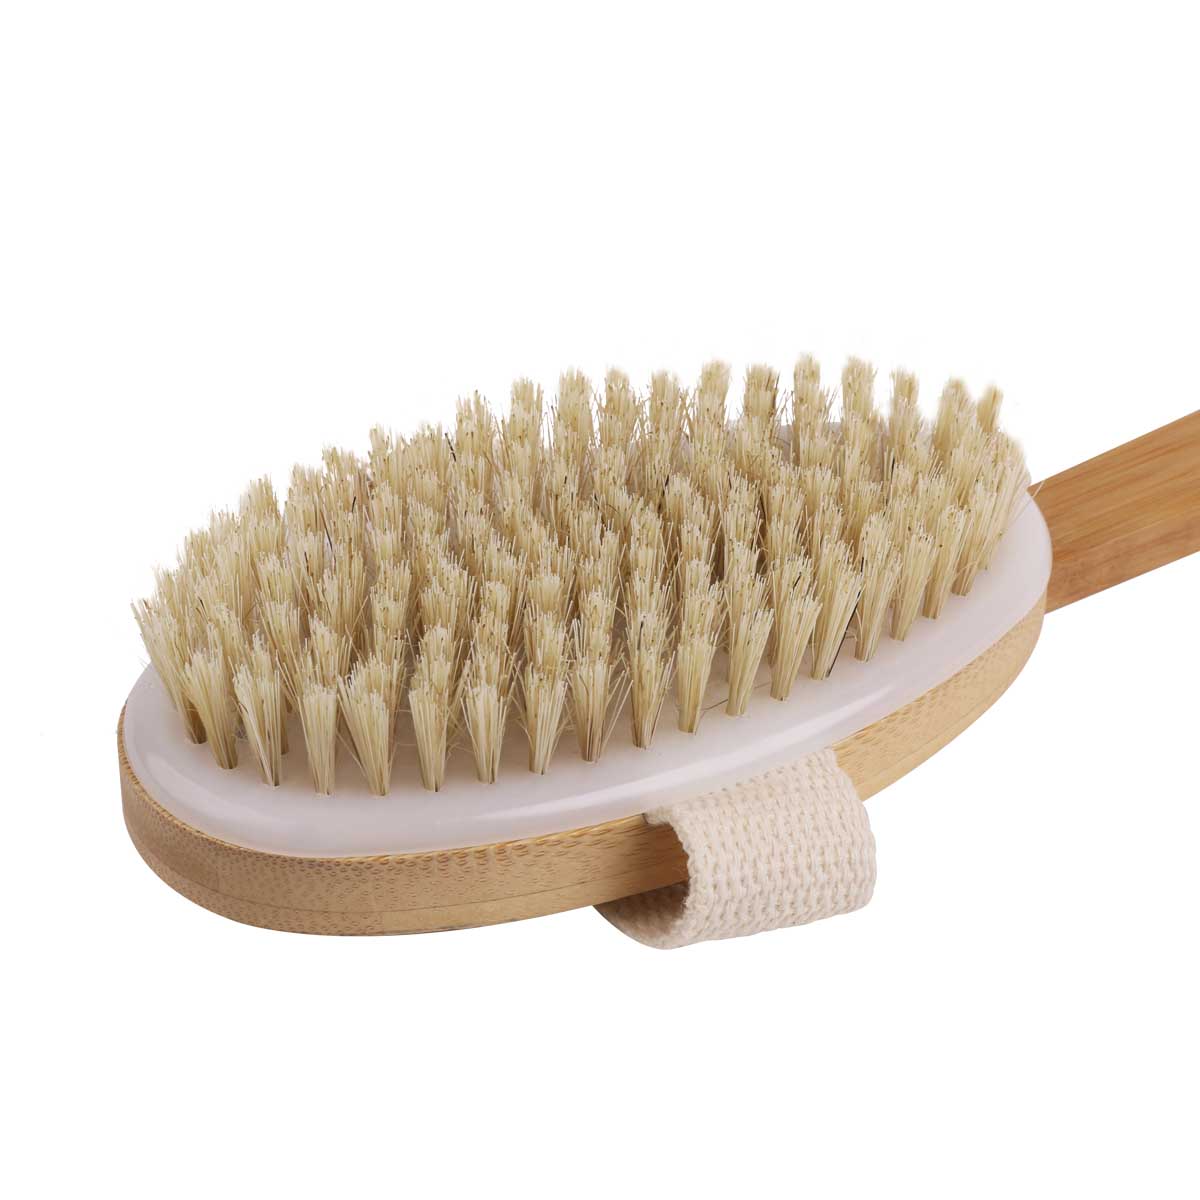 Spa Relaxus Wet & Dry Bamboo Bath Brush Kit with 3 Heads